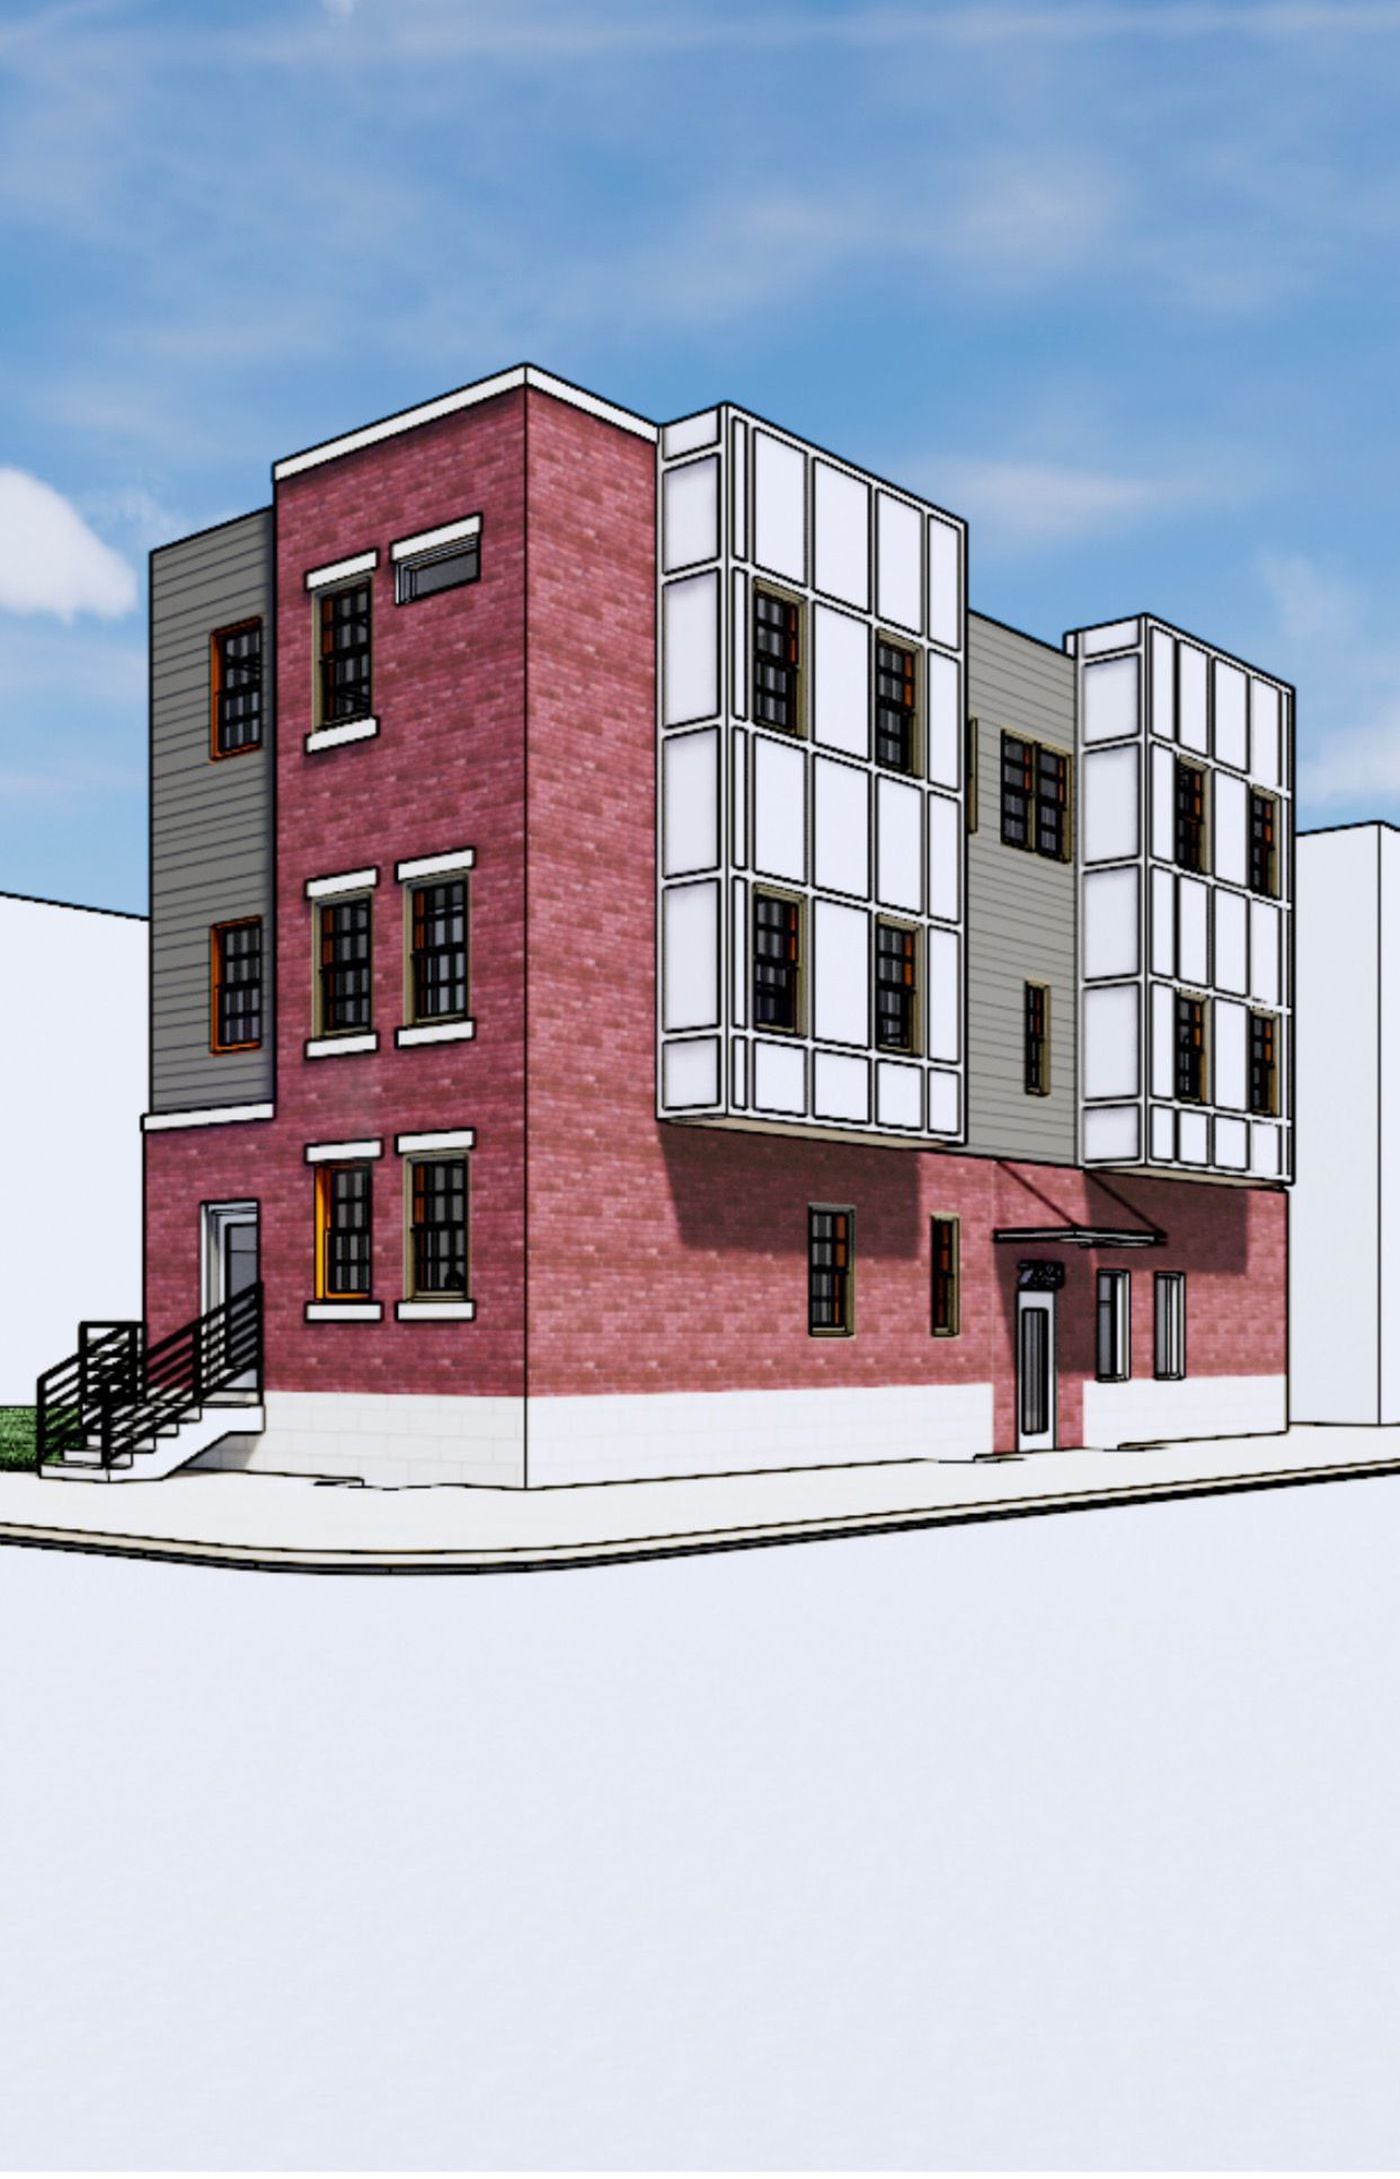 An artist's rendering shows an apartment building planned for a vacant lot at 29th and Diamond Streets in Strawberry Mansion.